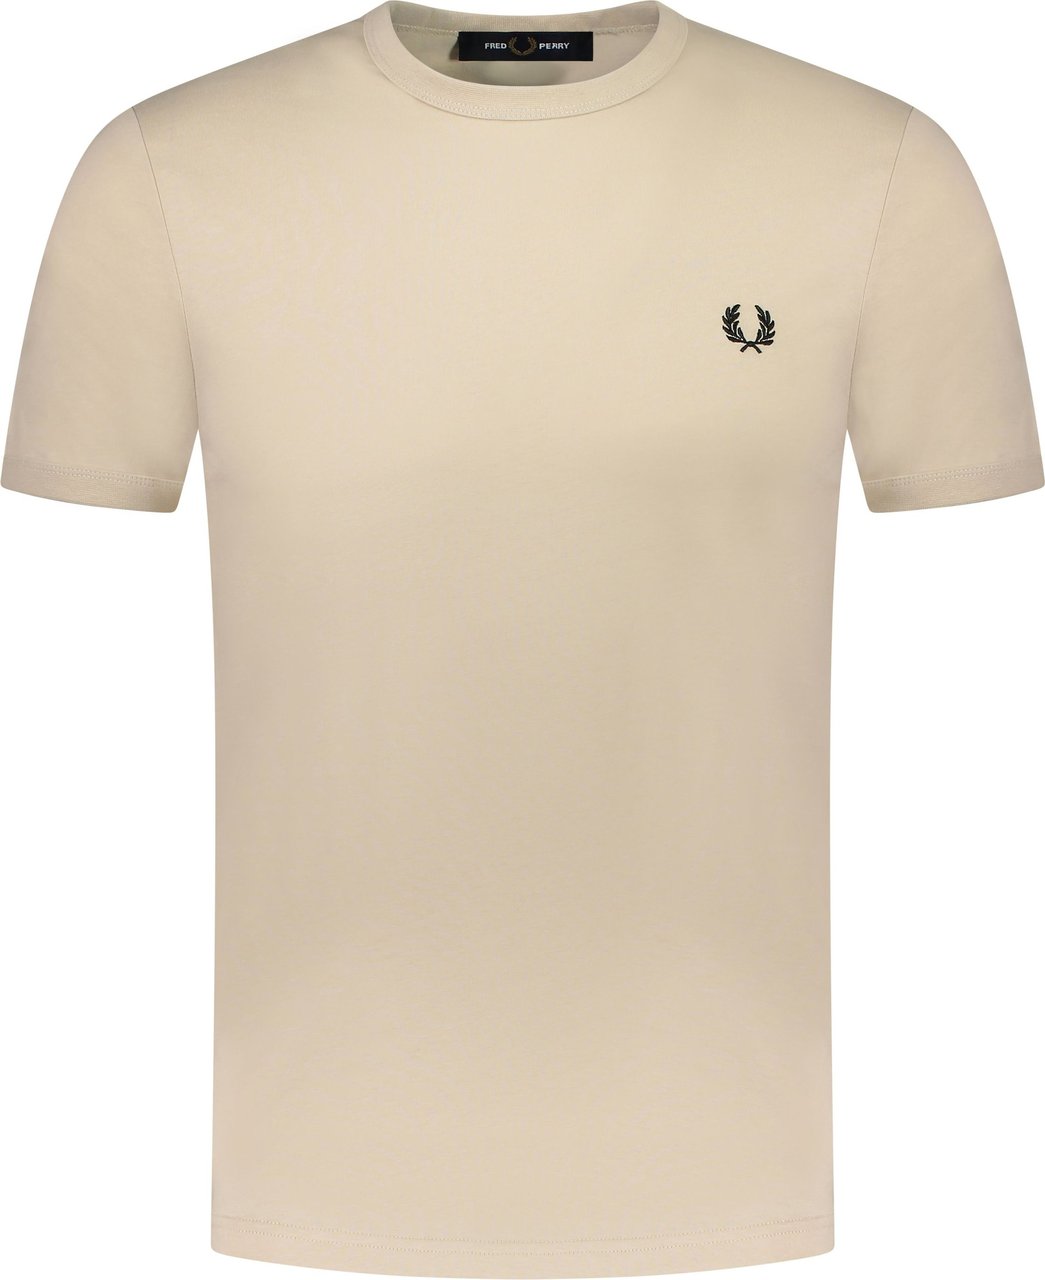 Fred Perry T-shirt Beige Beige